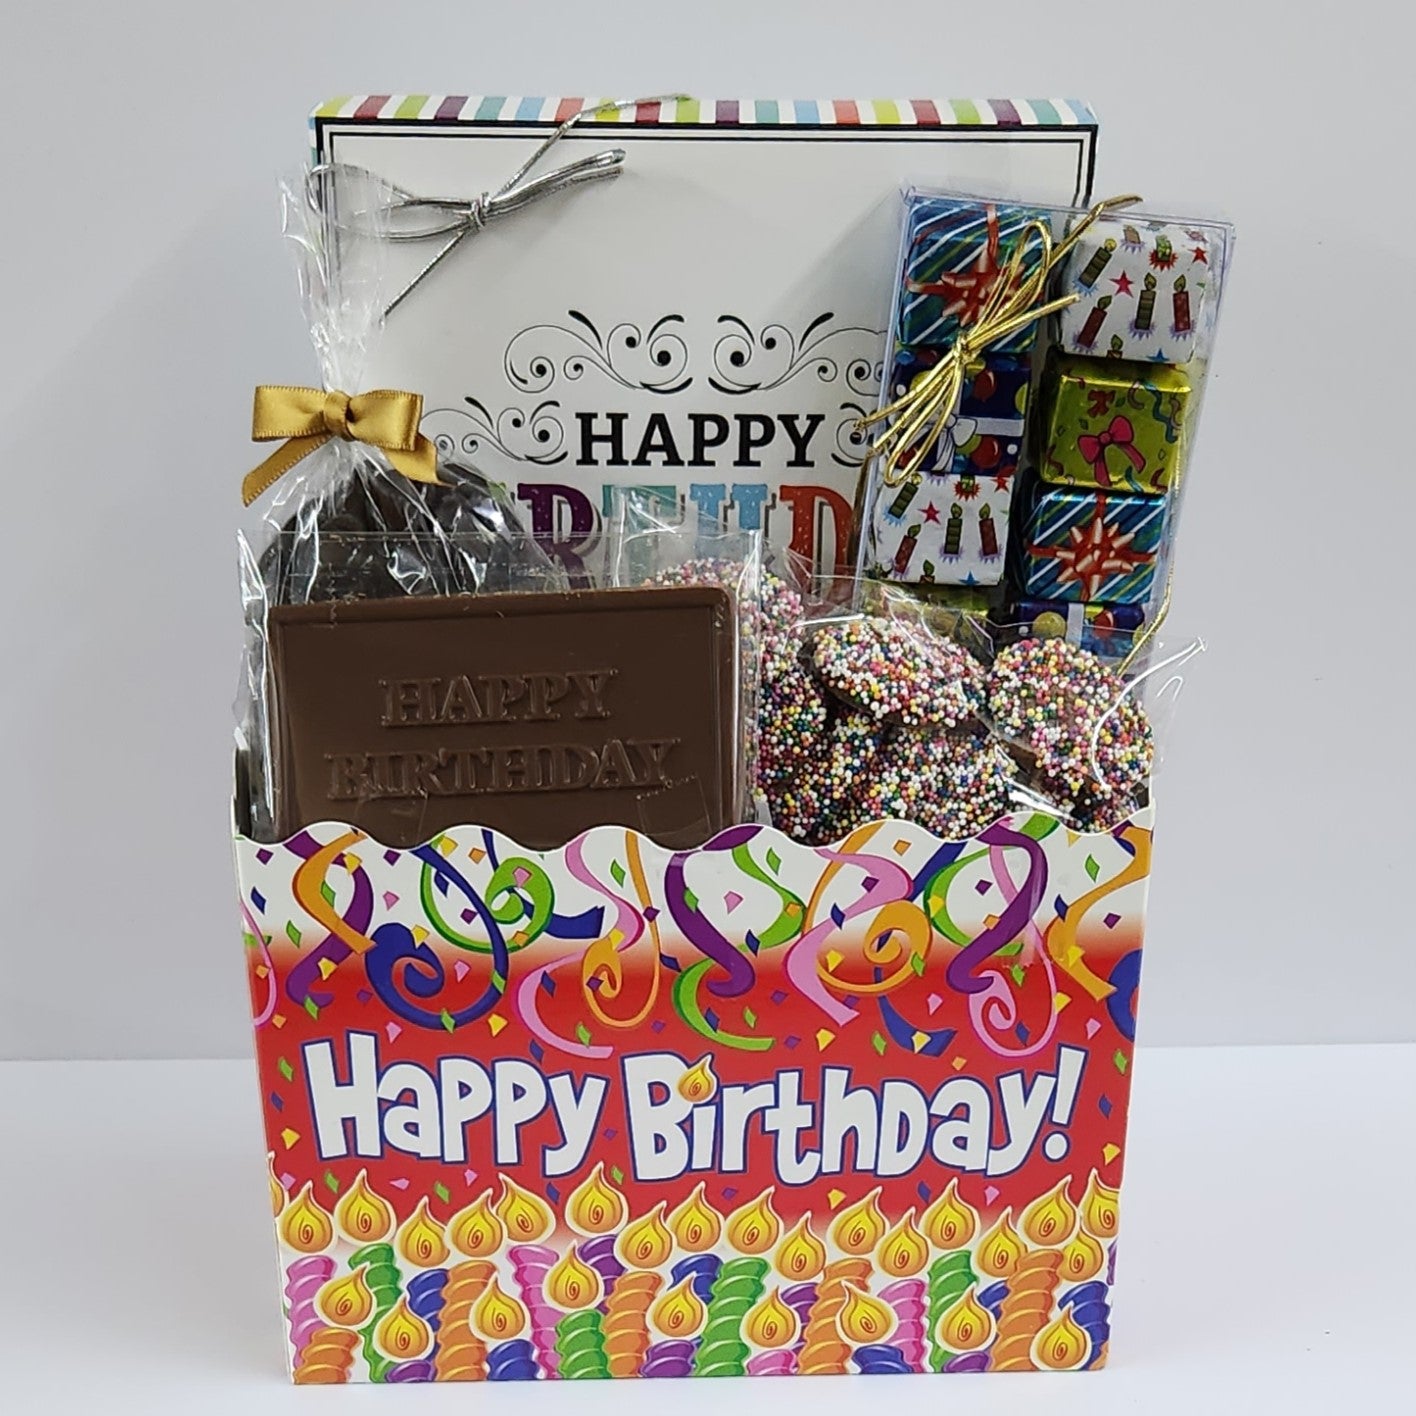 Fun themed Happy Birthday Gift Basket includes foiled milk chocolate presents, milk chocolate nonpareils, dark chocolate-covered cranberries, milk chocolate birthday card and a 16-piece cream, caramels, meltaways, and truffle assortment